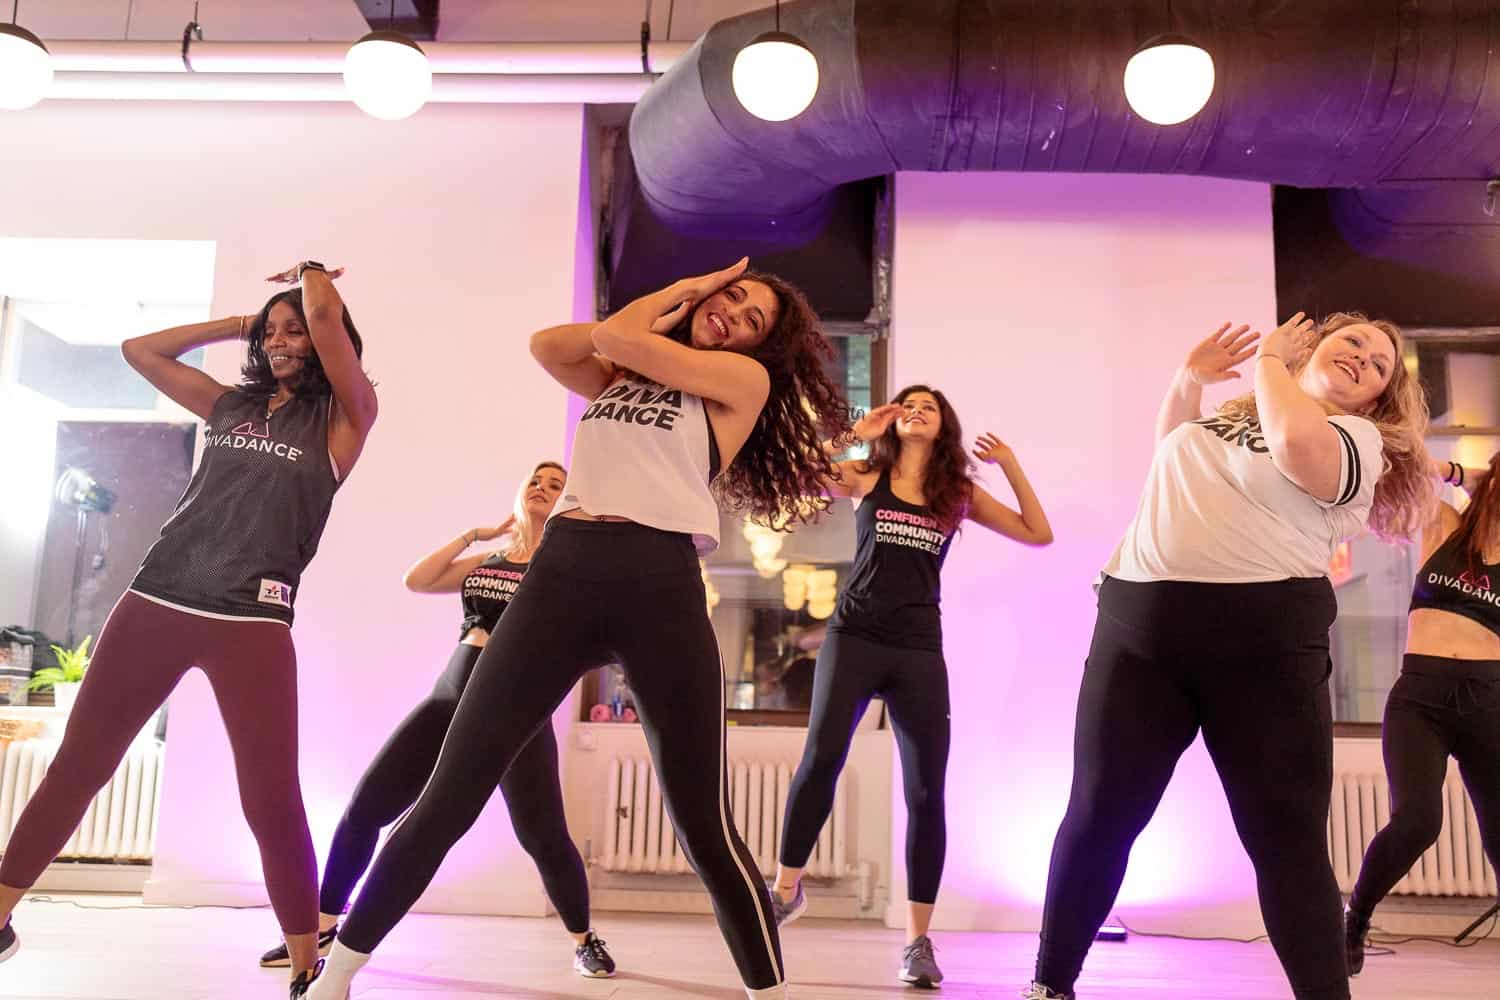 A group of women joyfully dancing in a studio, clad in black and white, under purple lights.